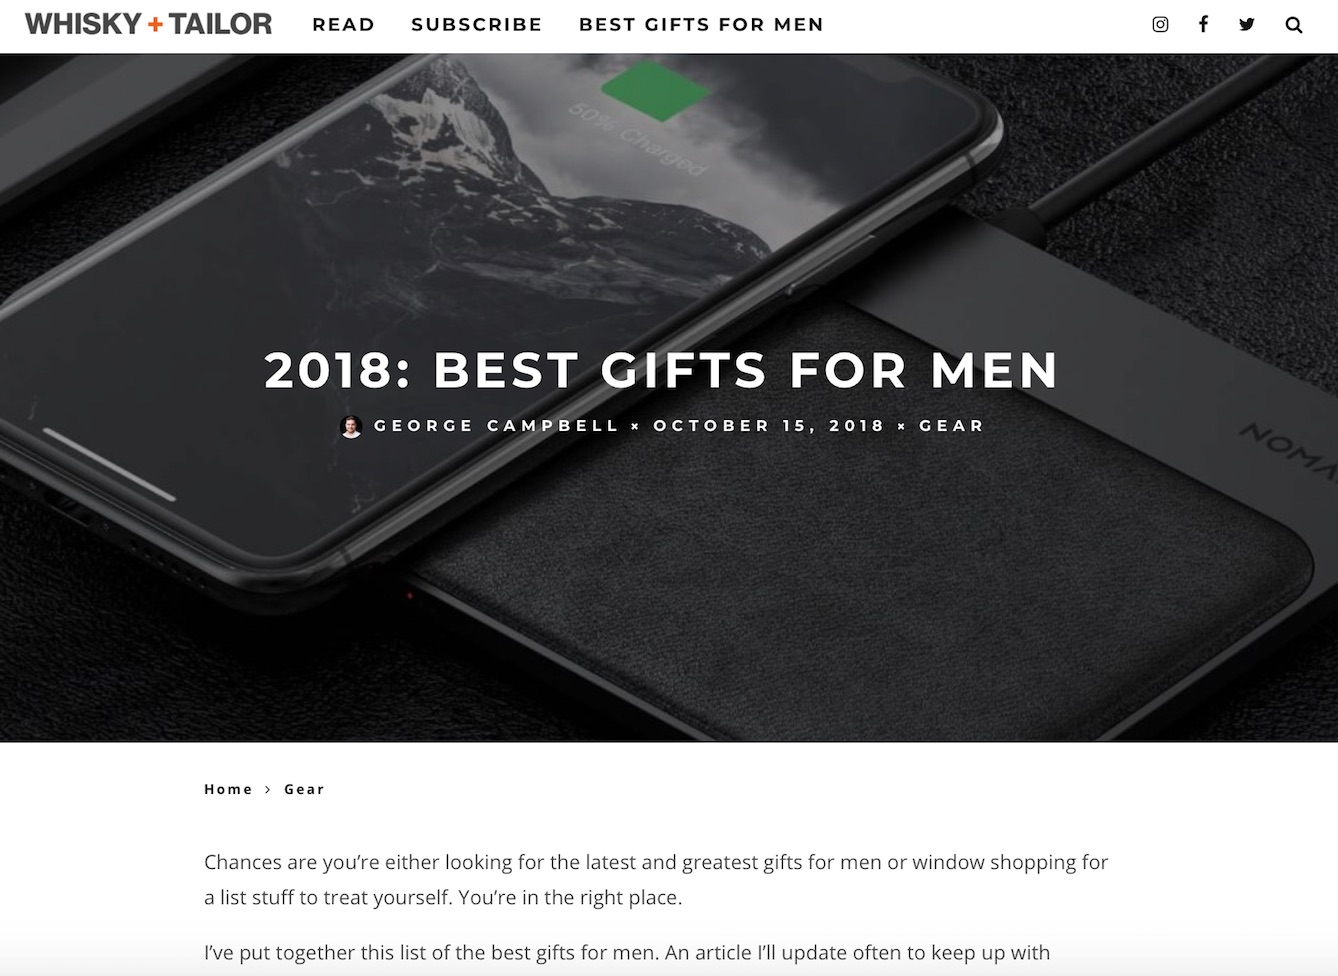 Whisky + Tailor’s 2018 Best Gifts For Men